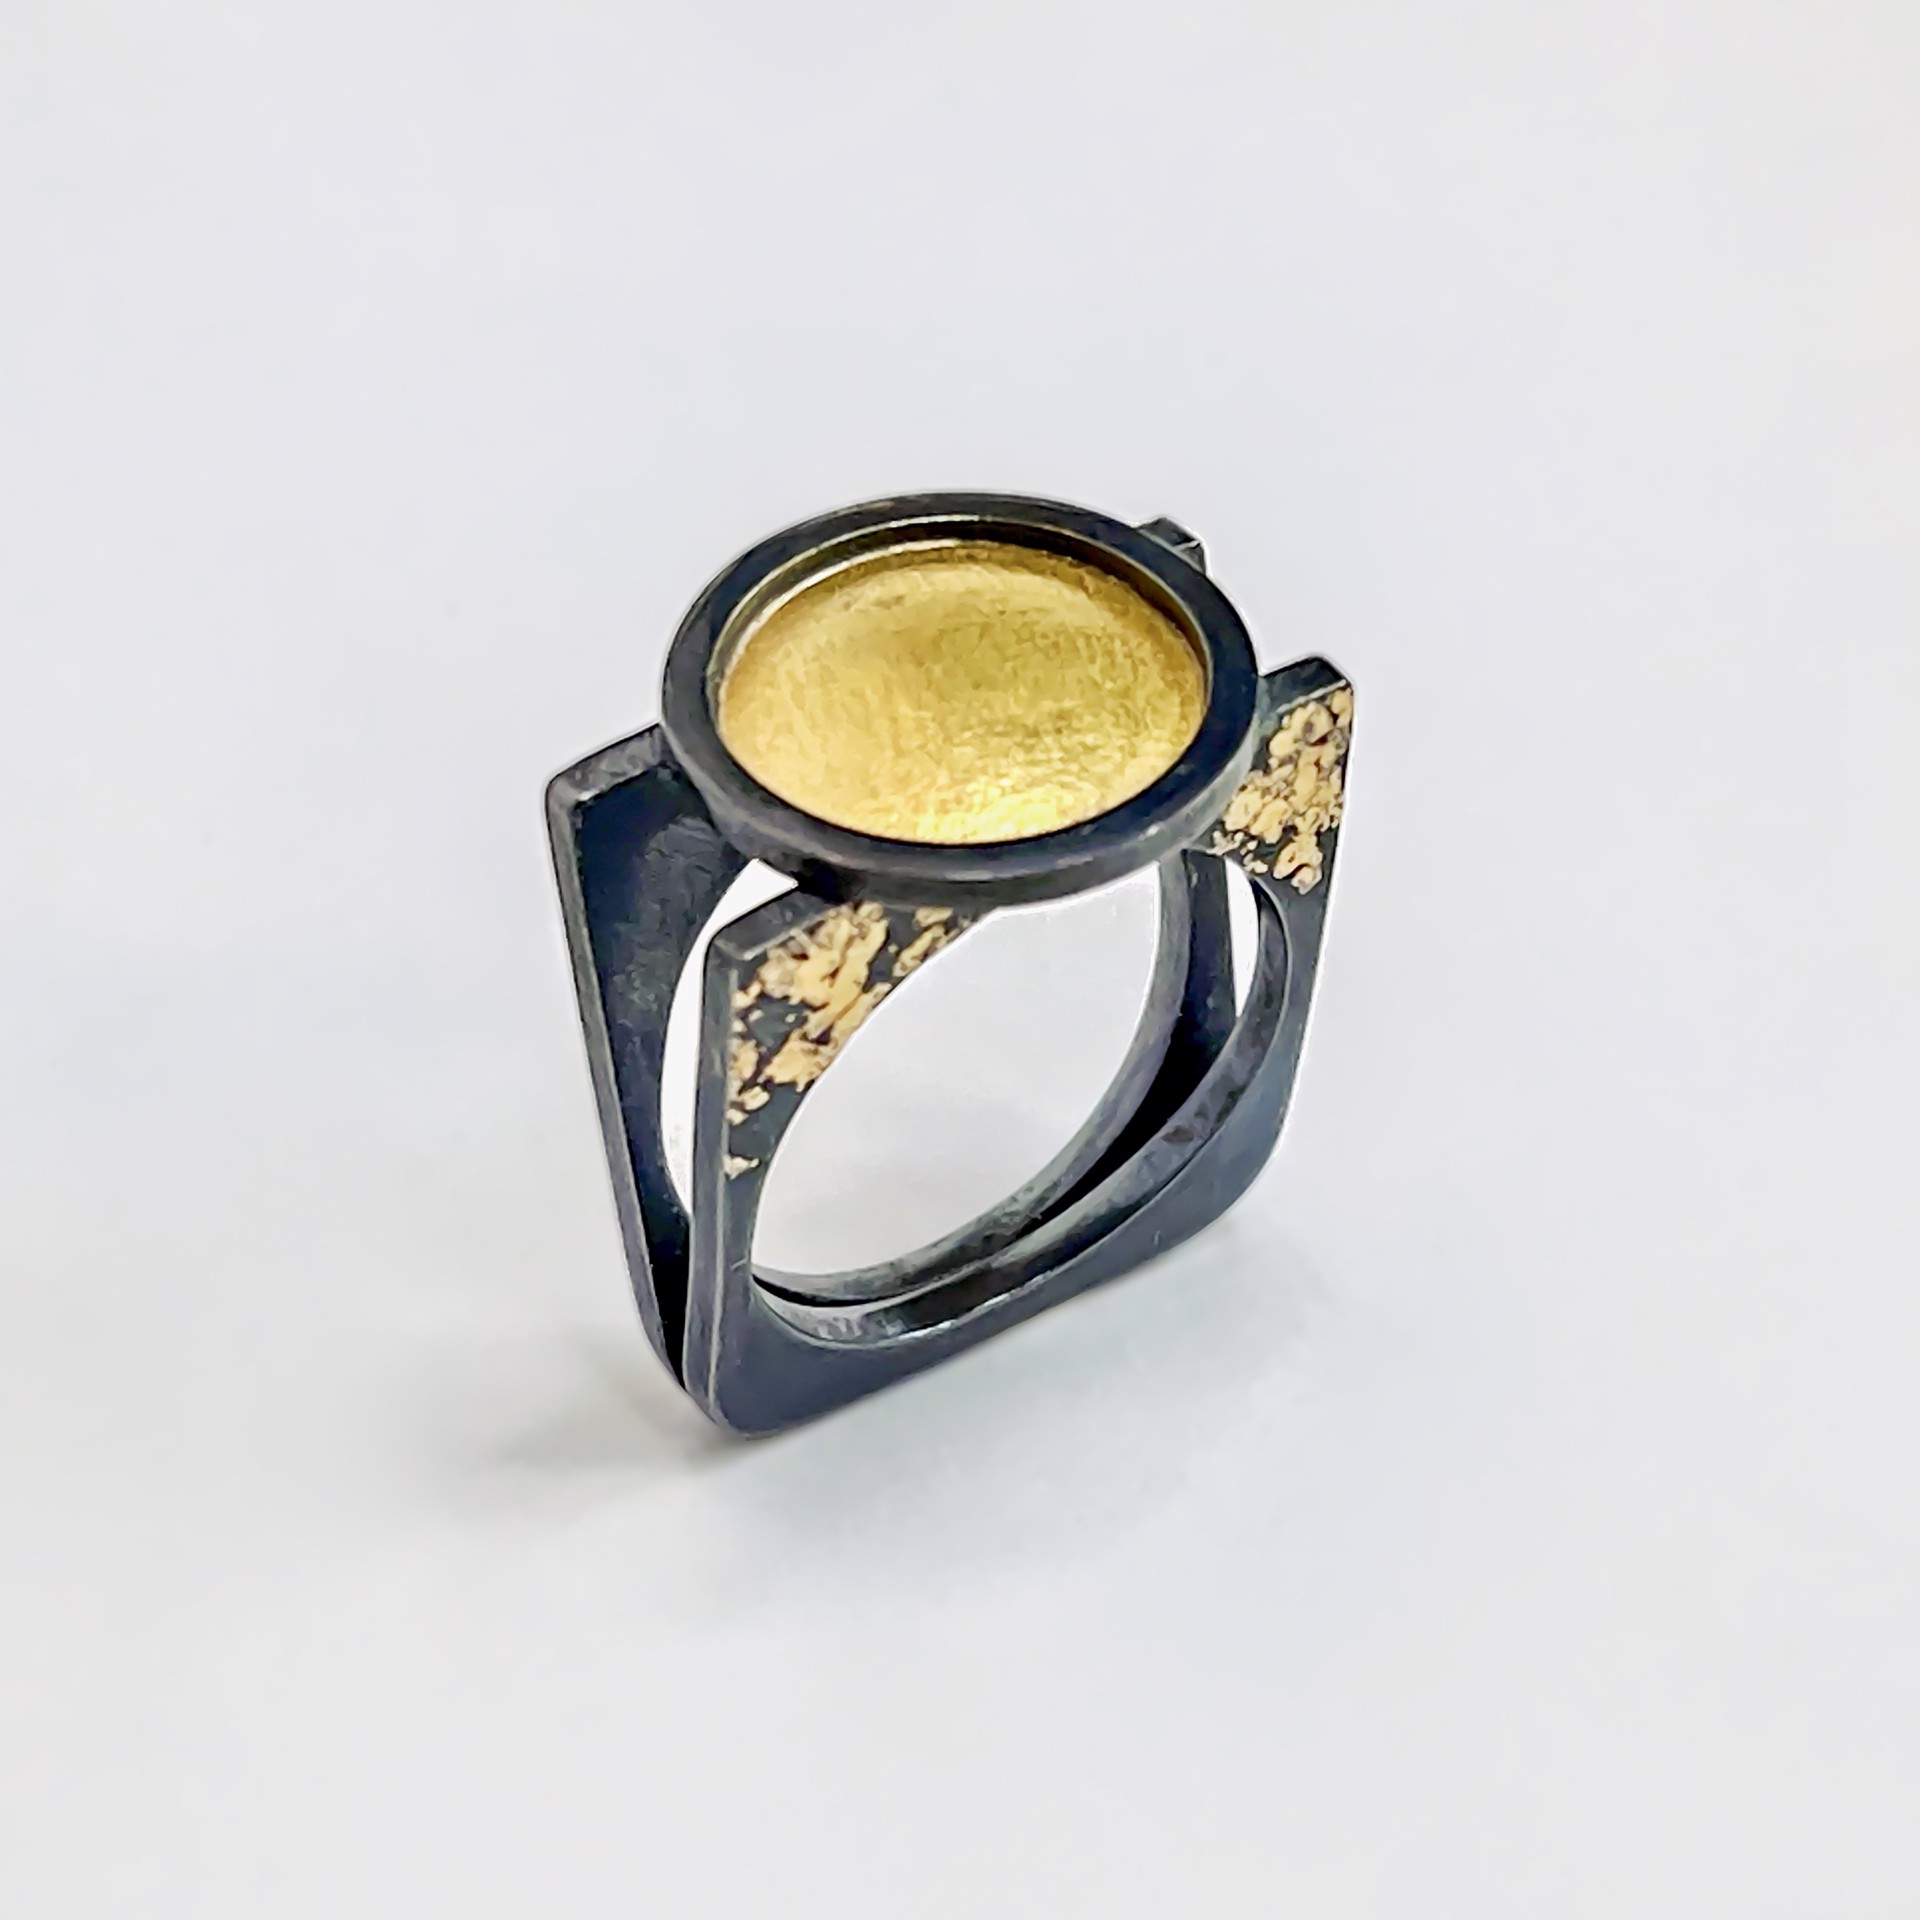 Split Ring with Gold Accents by Amerinda Alpern